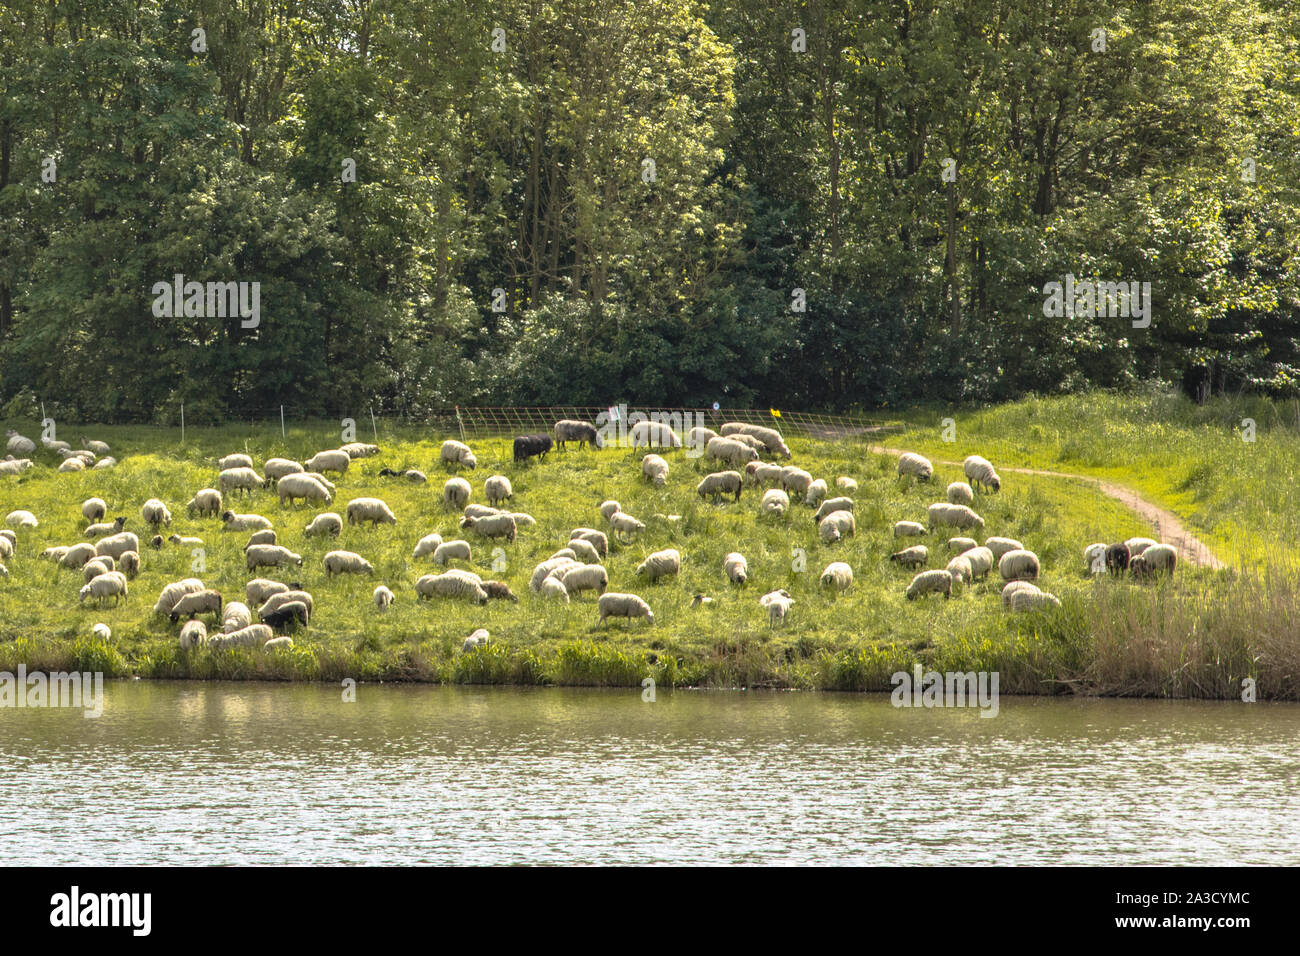 Herd of sheep grazing in city environment as alternative mowing strategy to machines Stock Photo